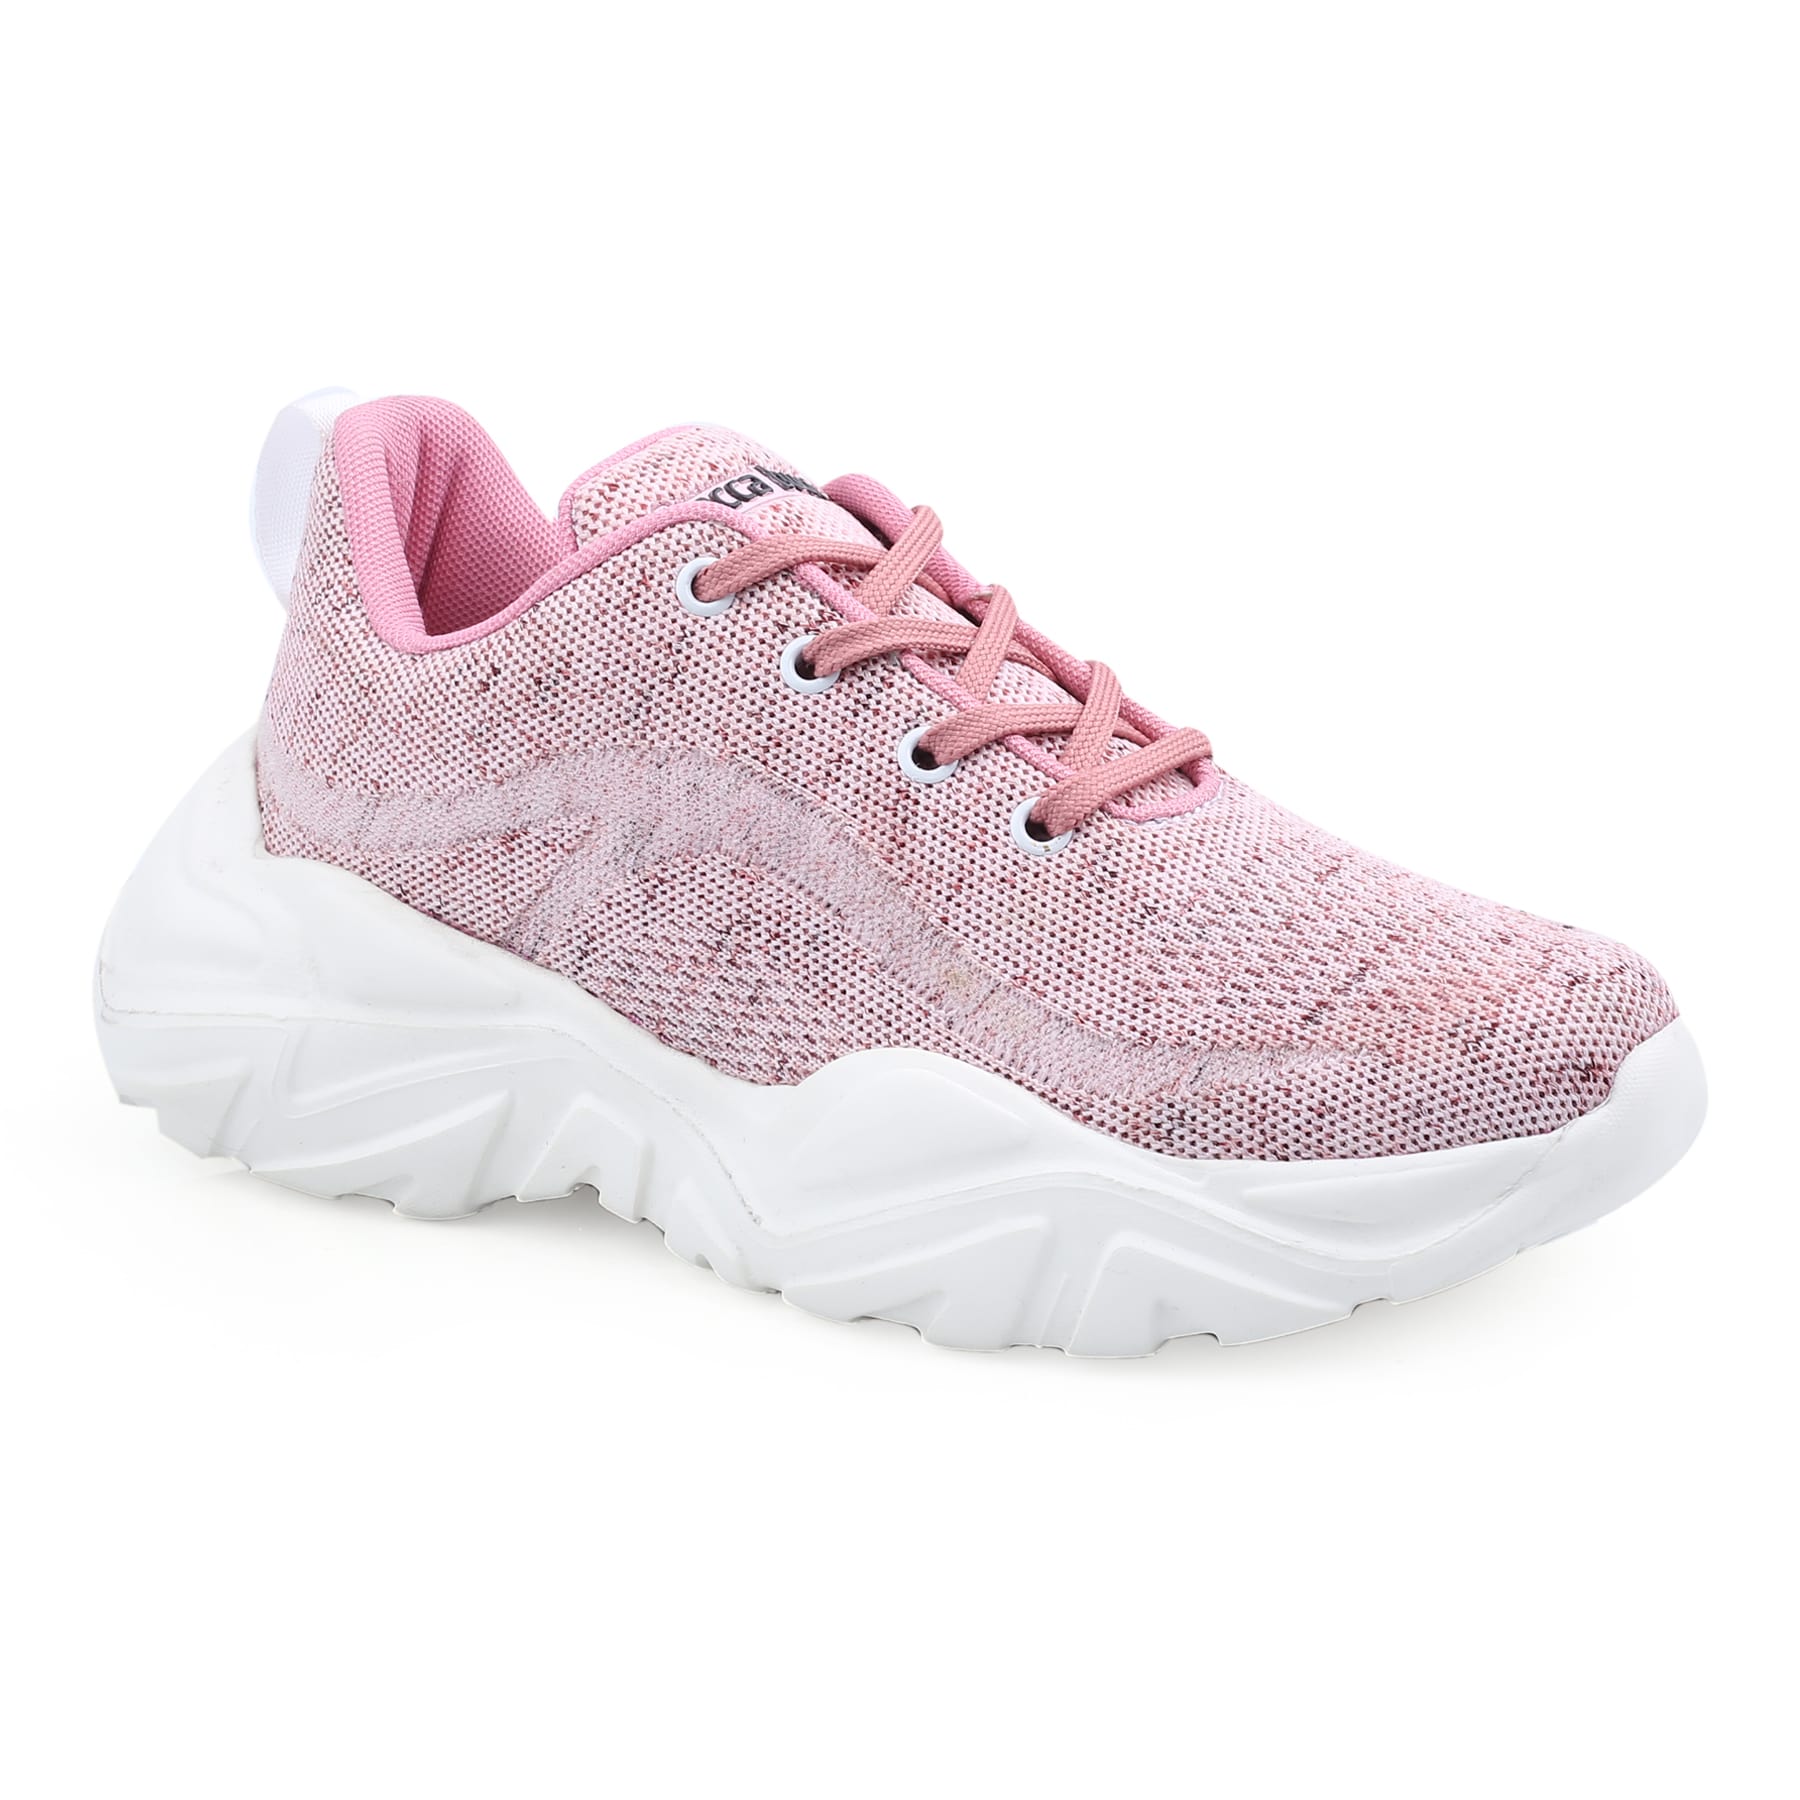 Bacca Bucci BUBBLES Women Chunky Platform Sneakers | Casual Fashion Shoes with Lightweight Sole